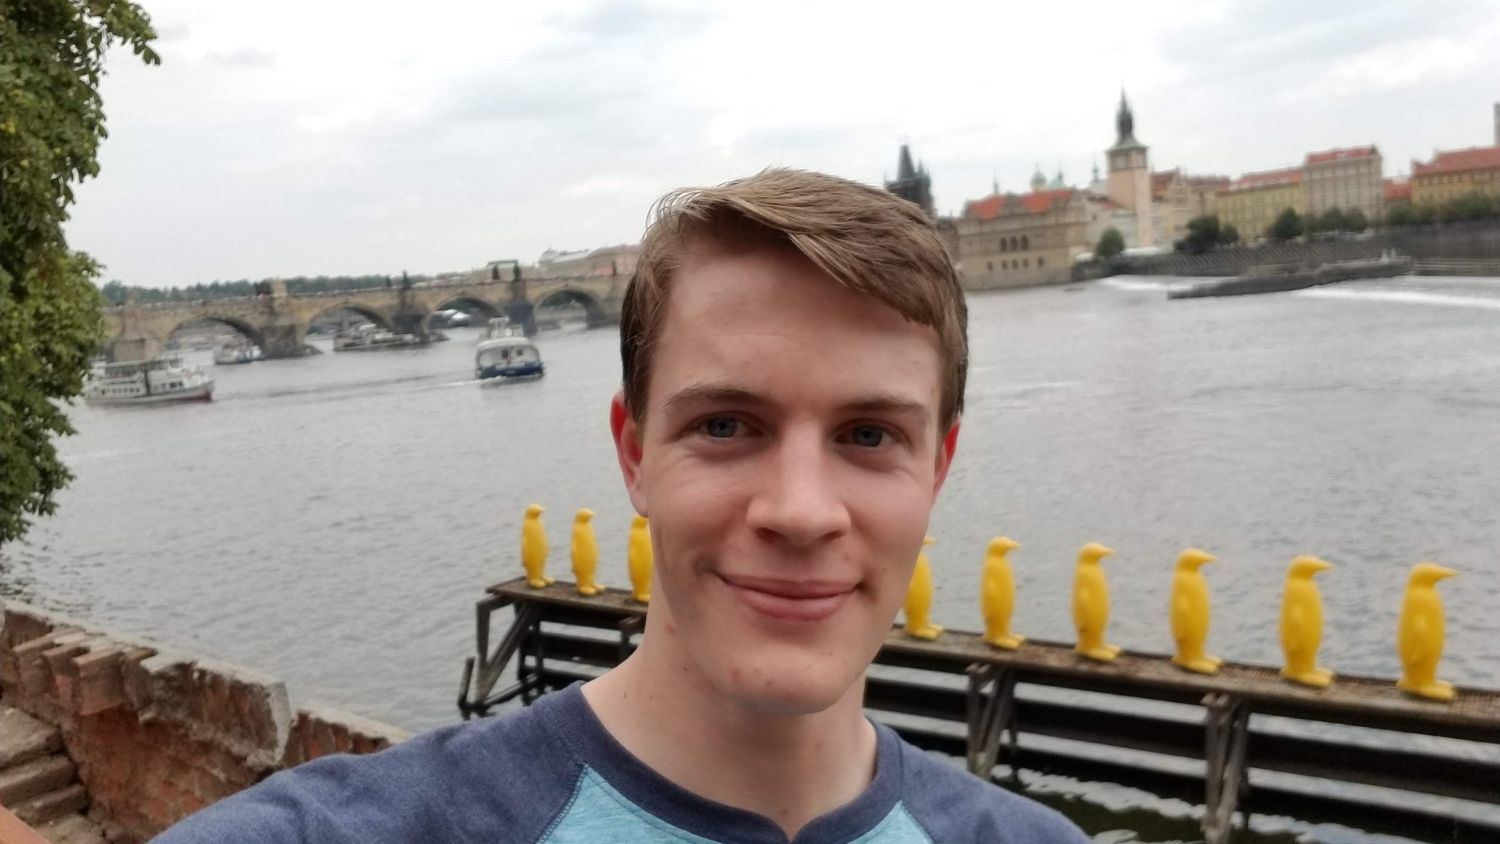 A student, Justin, next to Charles Bridge by the river